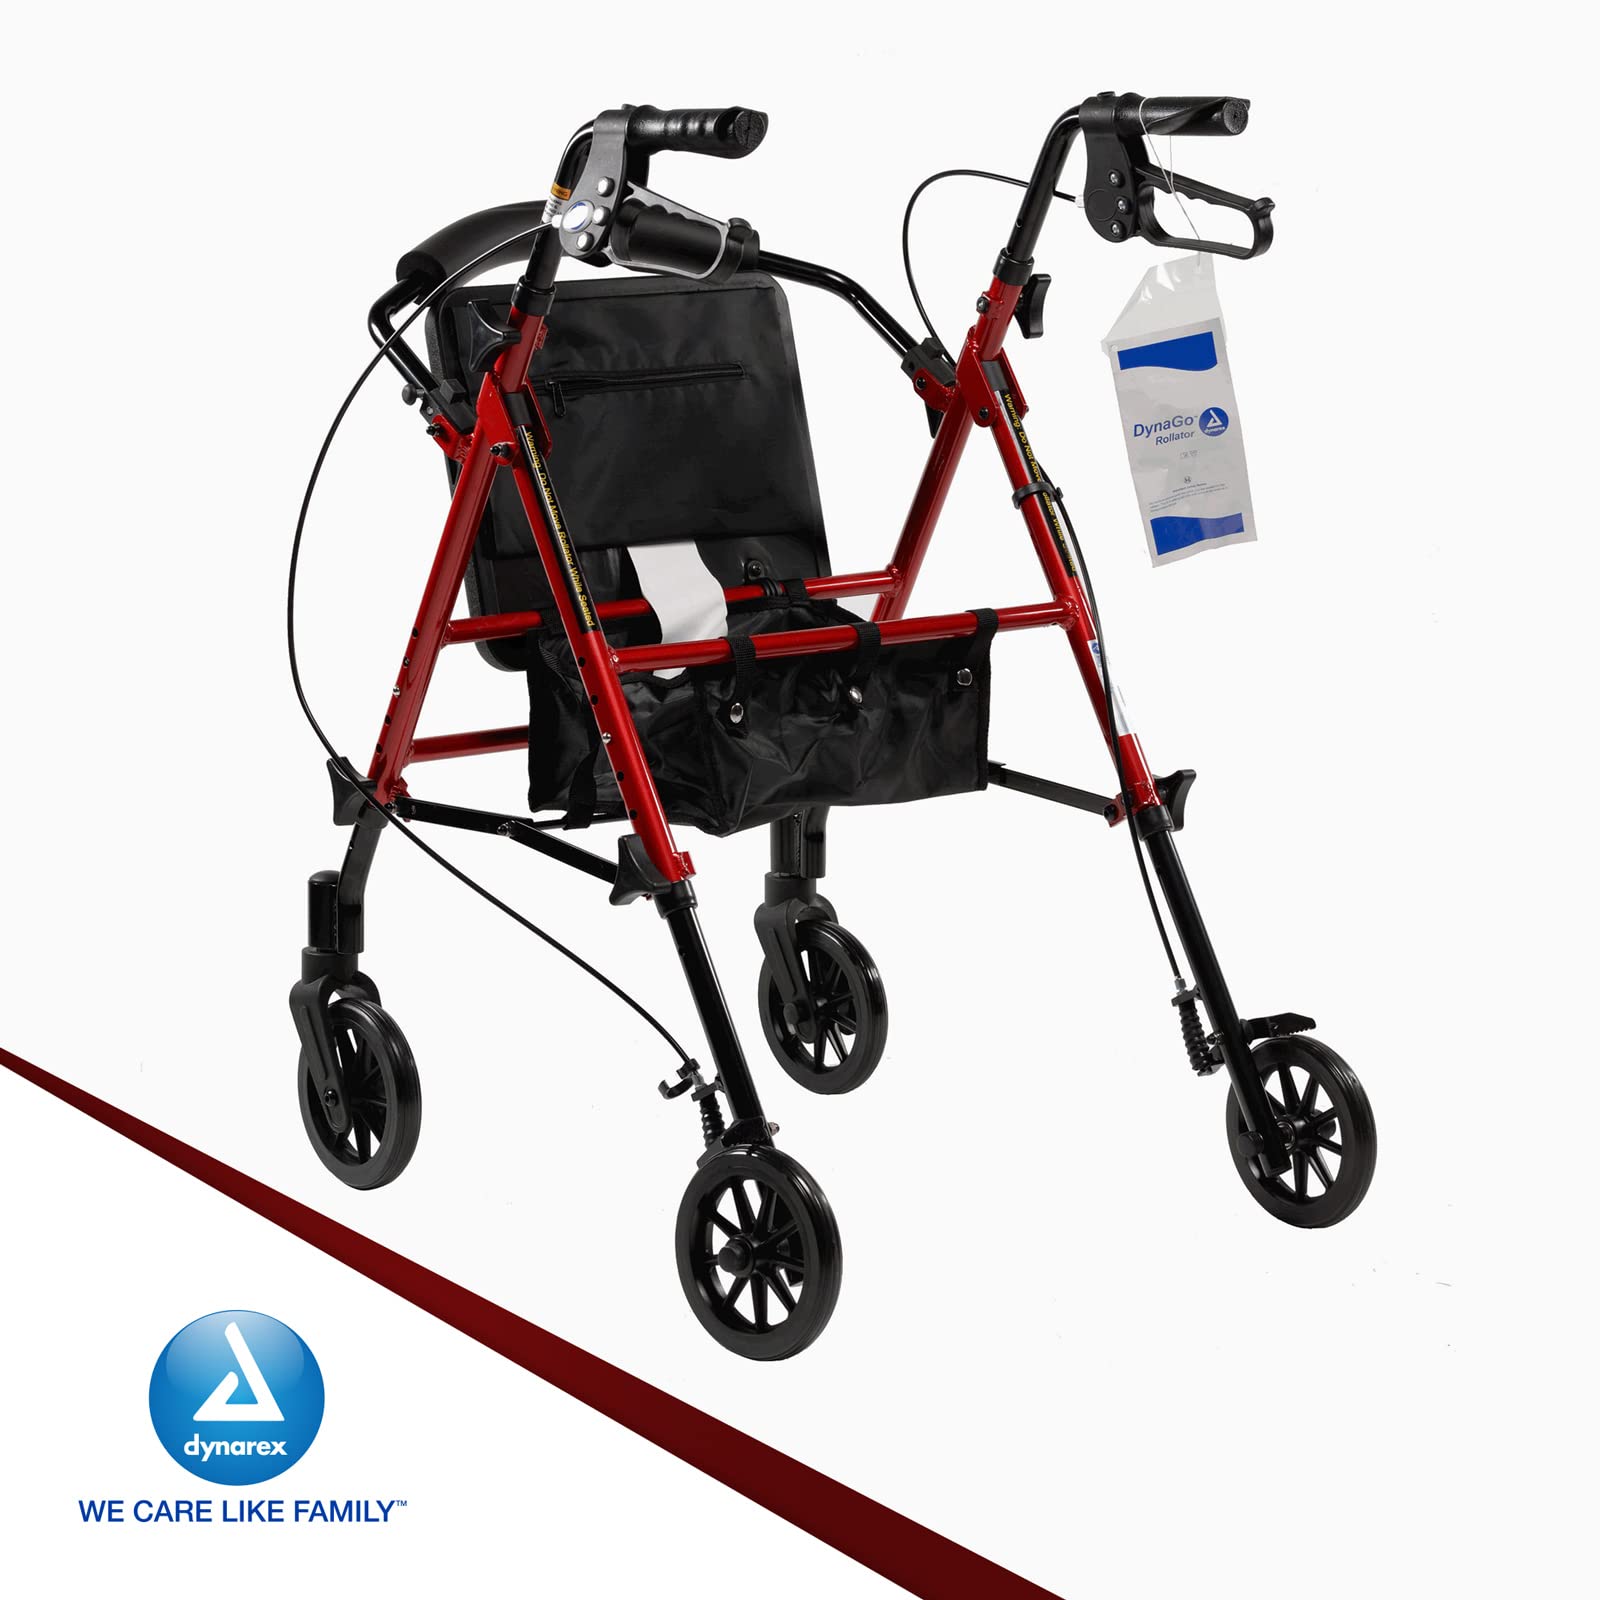 Dynarex DynaGo Flex Rollator - Foldable, Portable, Stand-Up Rolling Walker - 6” Wheels, Adjustable Seat Height & 300 lb. Weight Capacity, Red Frame, 1 Rollator